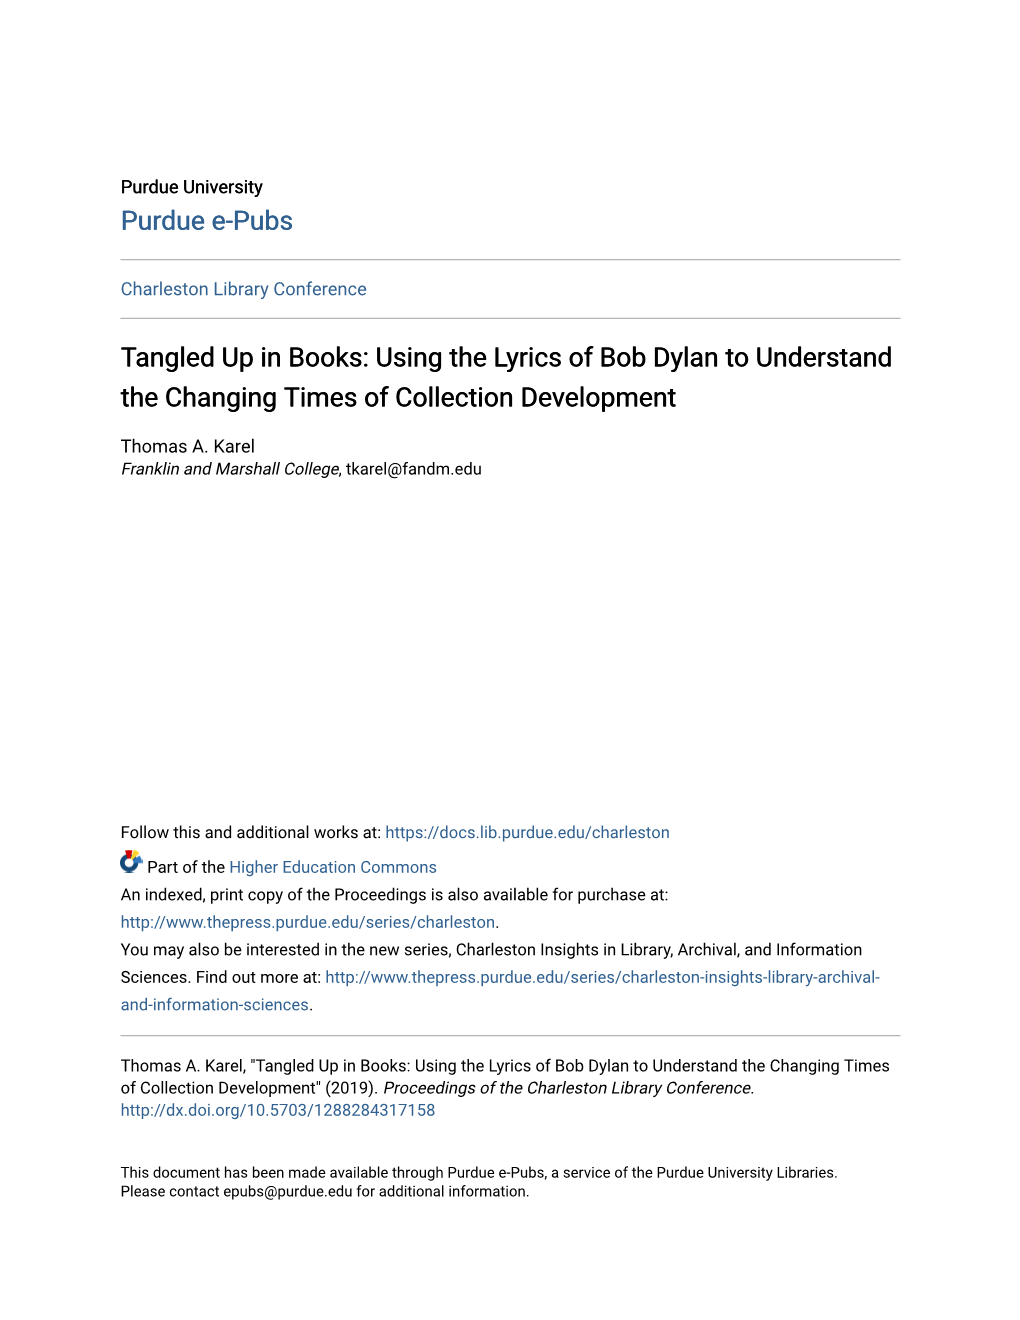 Tangled up in Books: Using the Lyrics of Bob Dylan to Understand the Changing Times of Collection Development